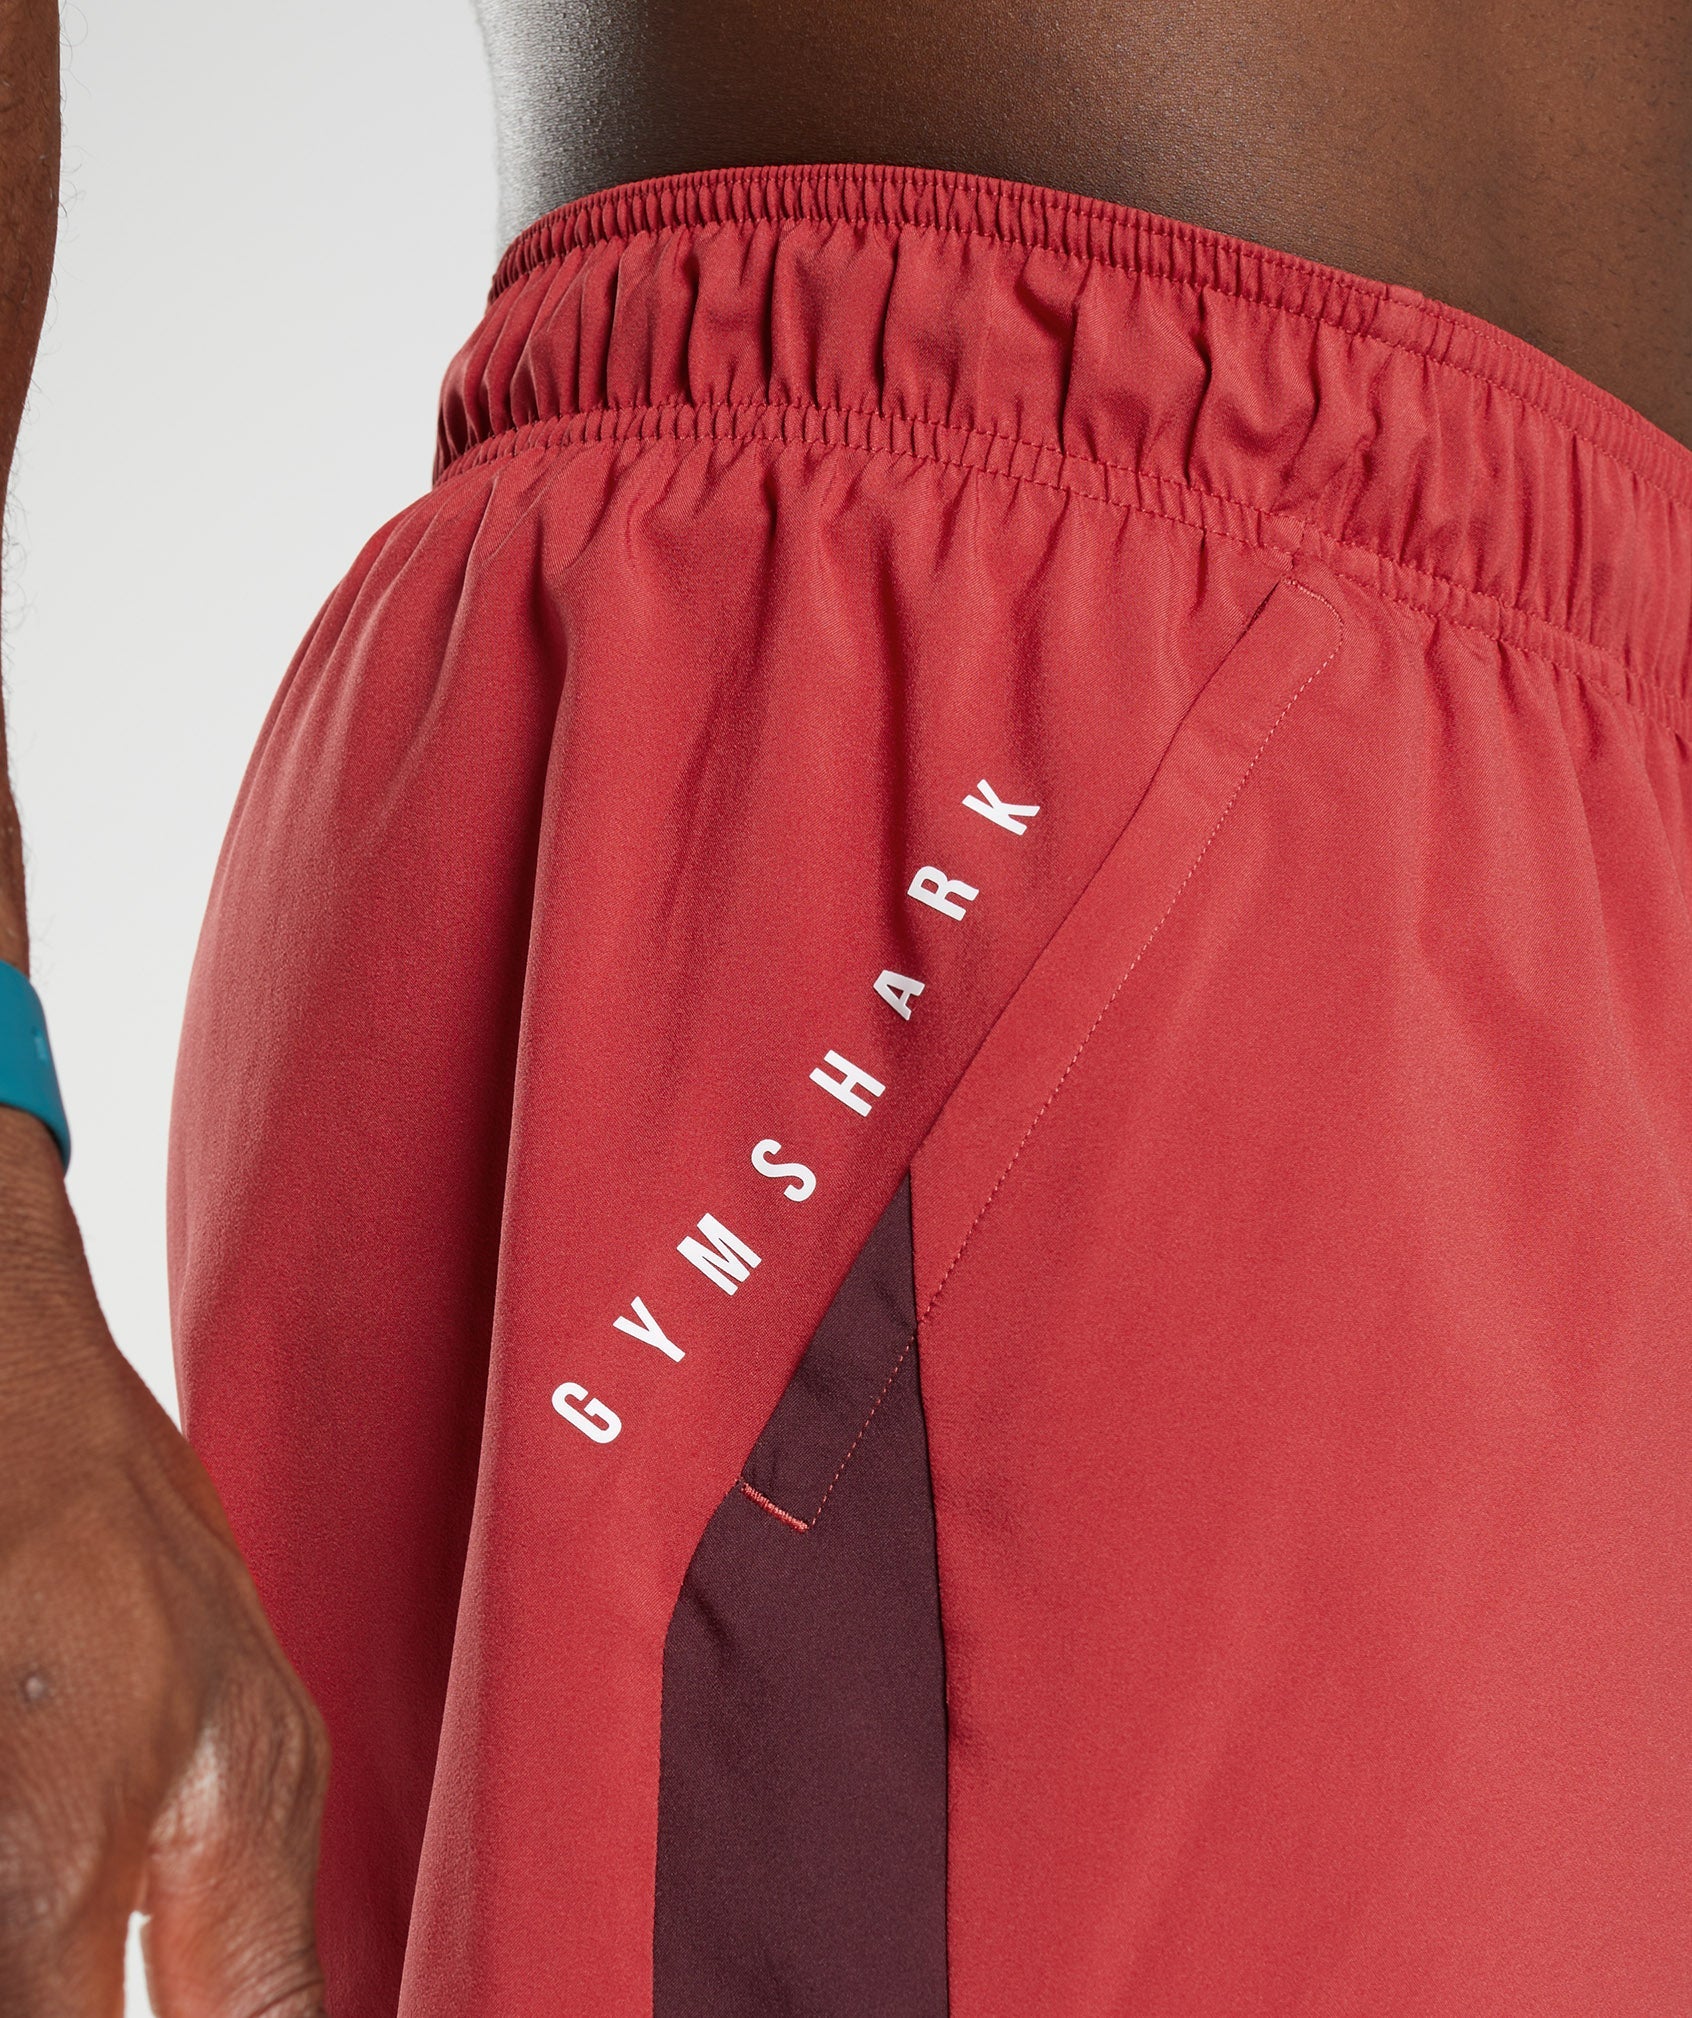 Sport 5" Shorts in Salsa Red/ Baked Maroon - view 5